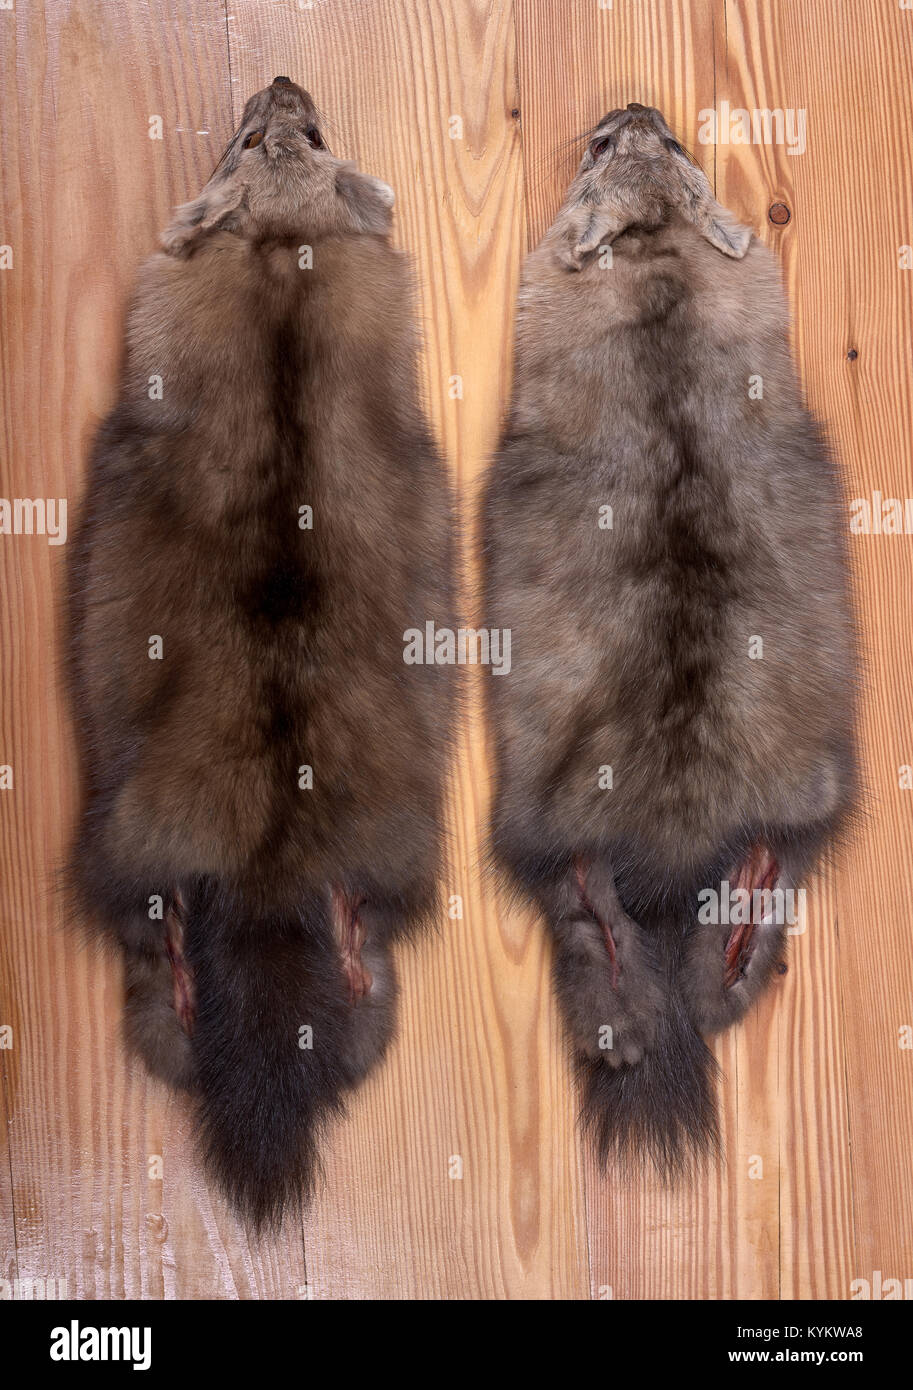 Two fur skins of Barguzin sable of different shades of color. View from back closeup Stock Photo